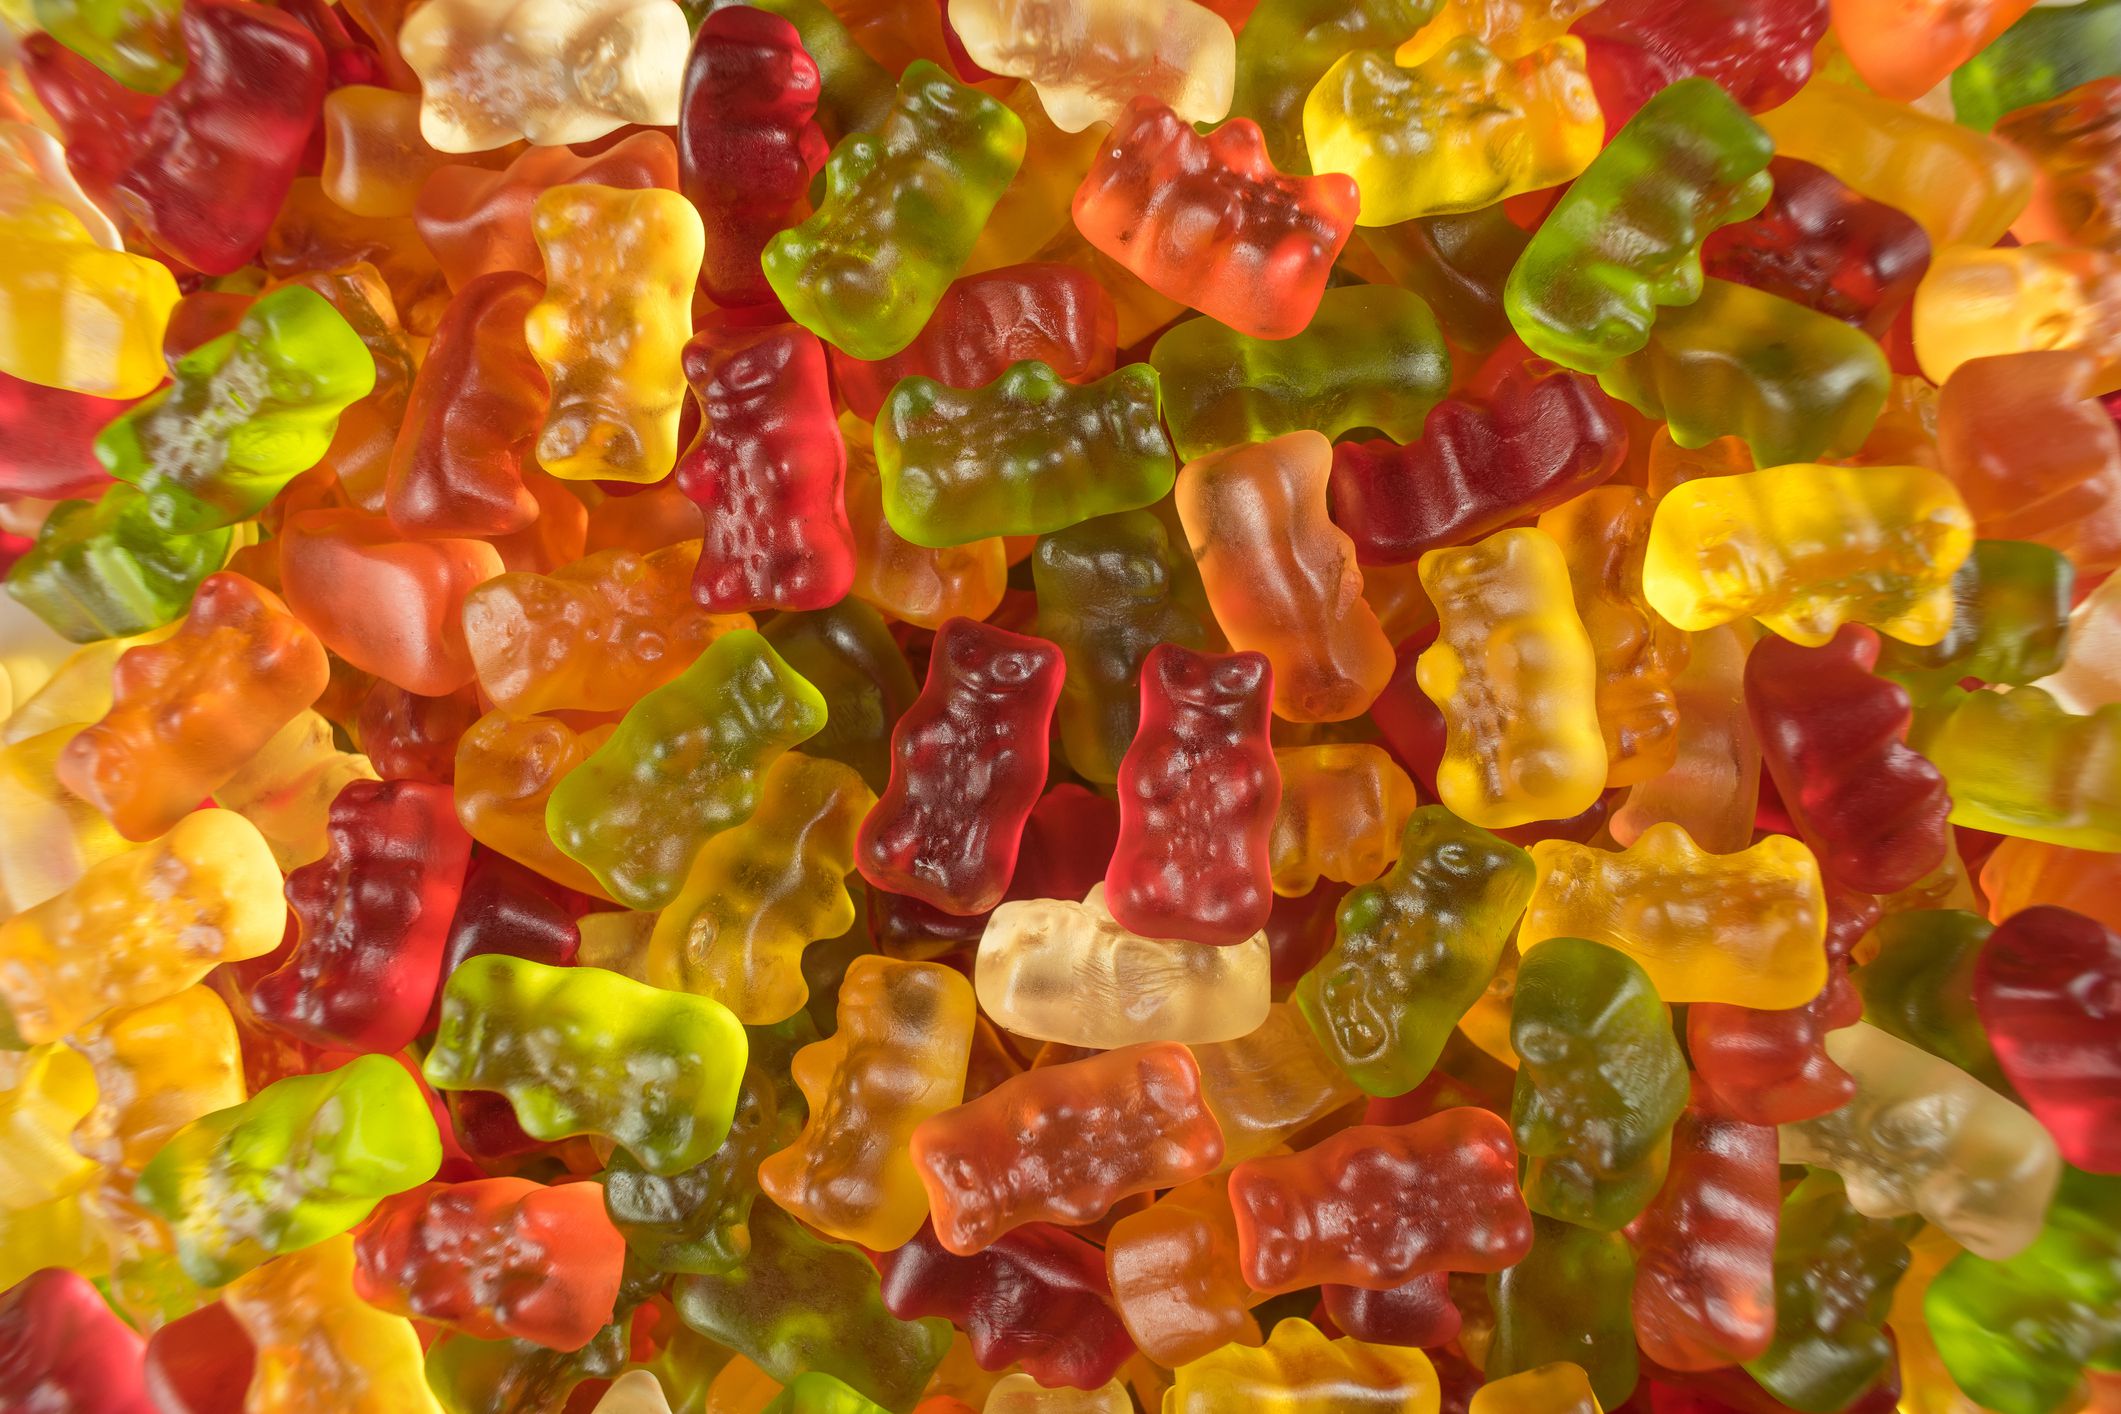 Thc Gummies Given Out By Middle School Student Sickened Classmates